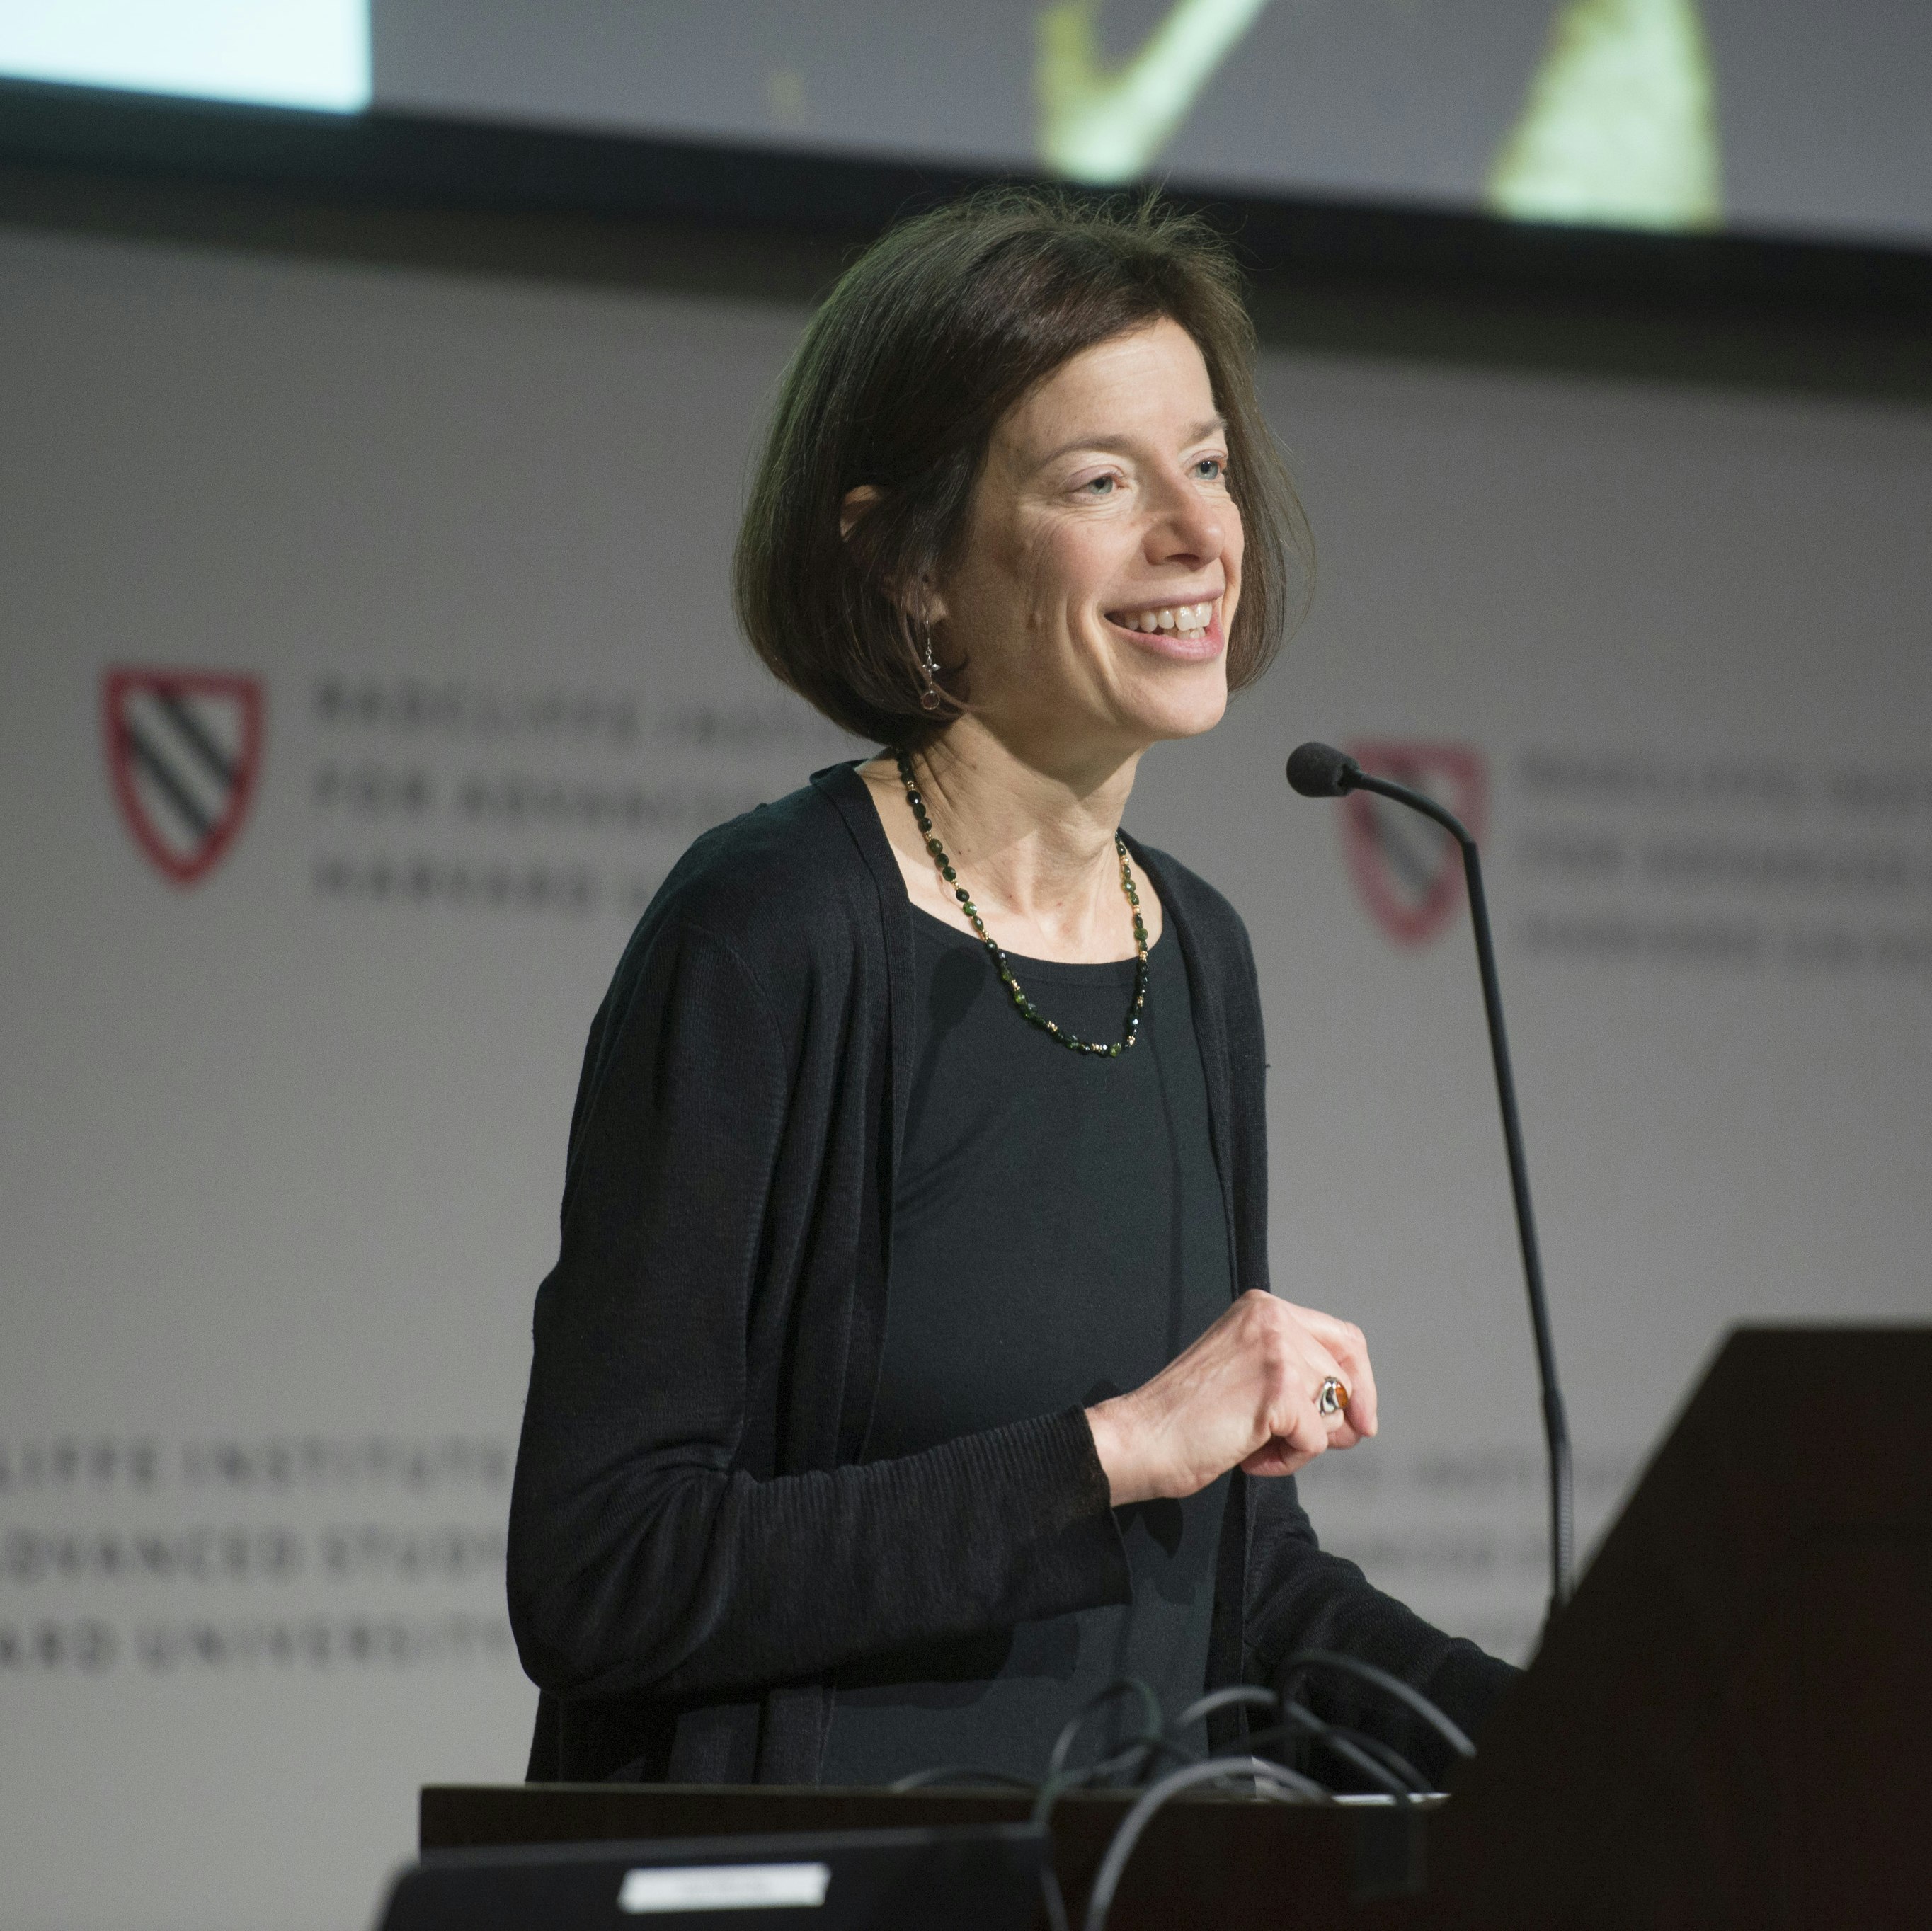 Susan Faludi speaking at Radcliffe's "Hidden in Plain Sight" panel discussion.